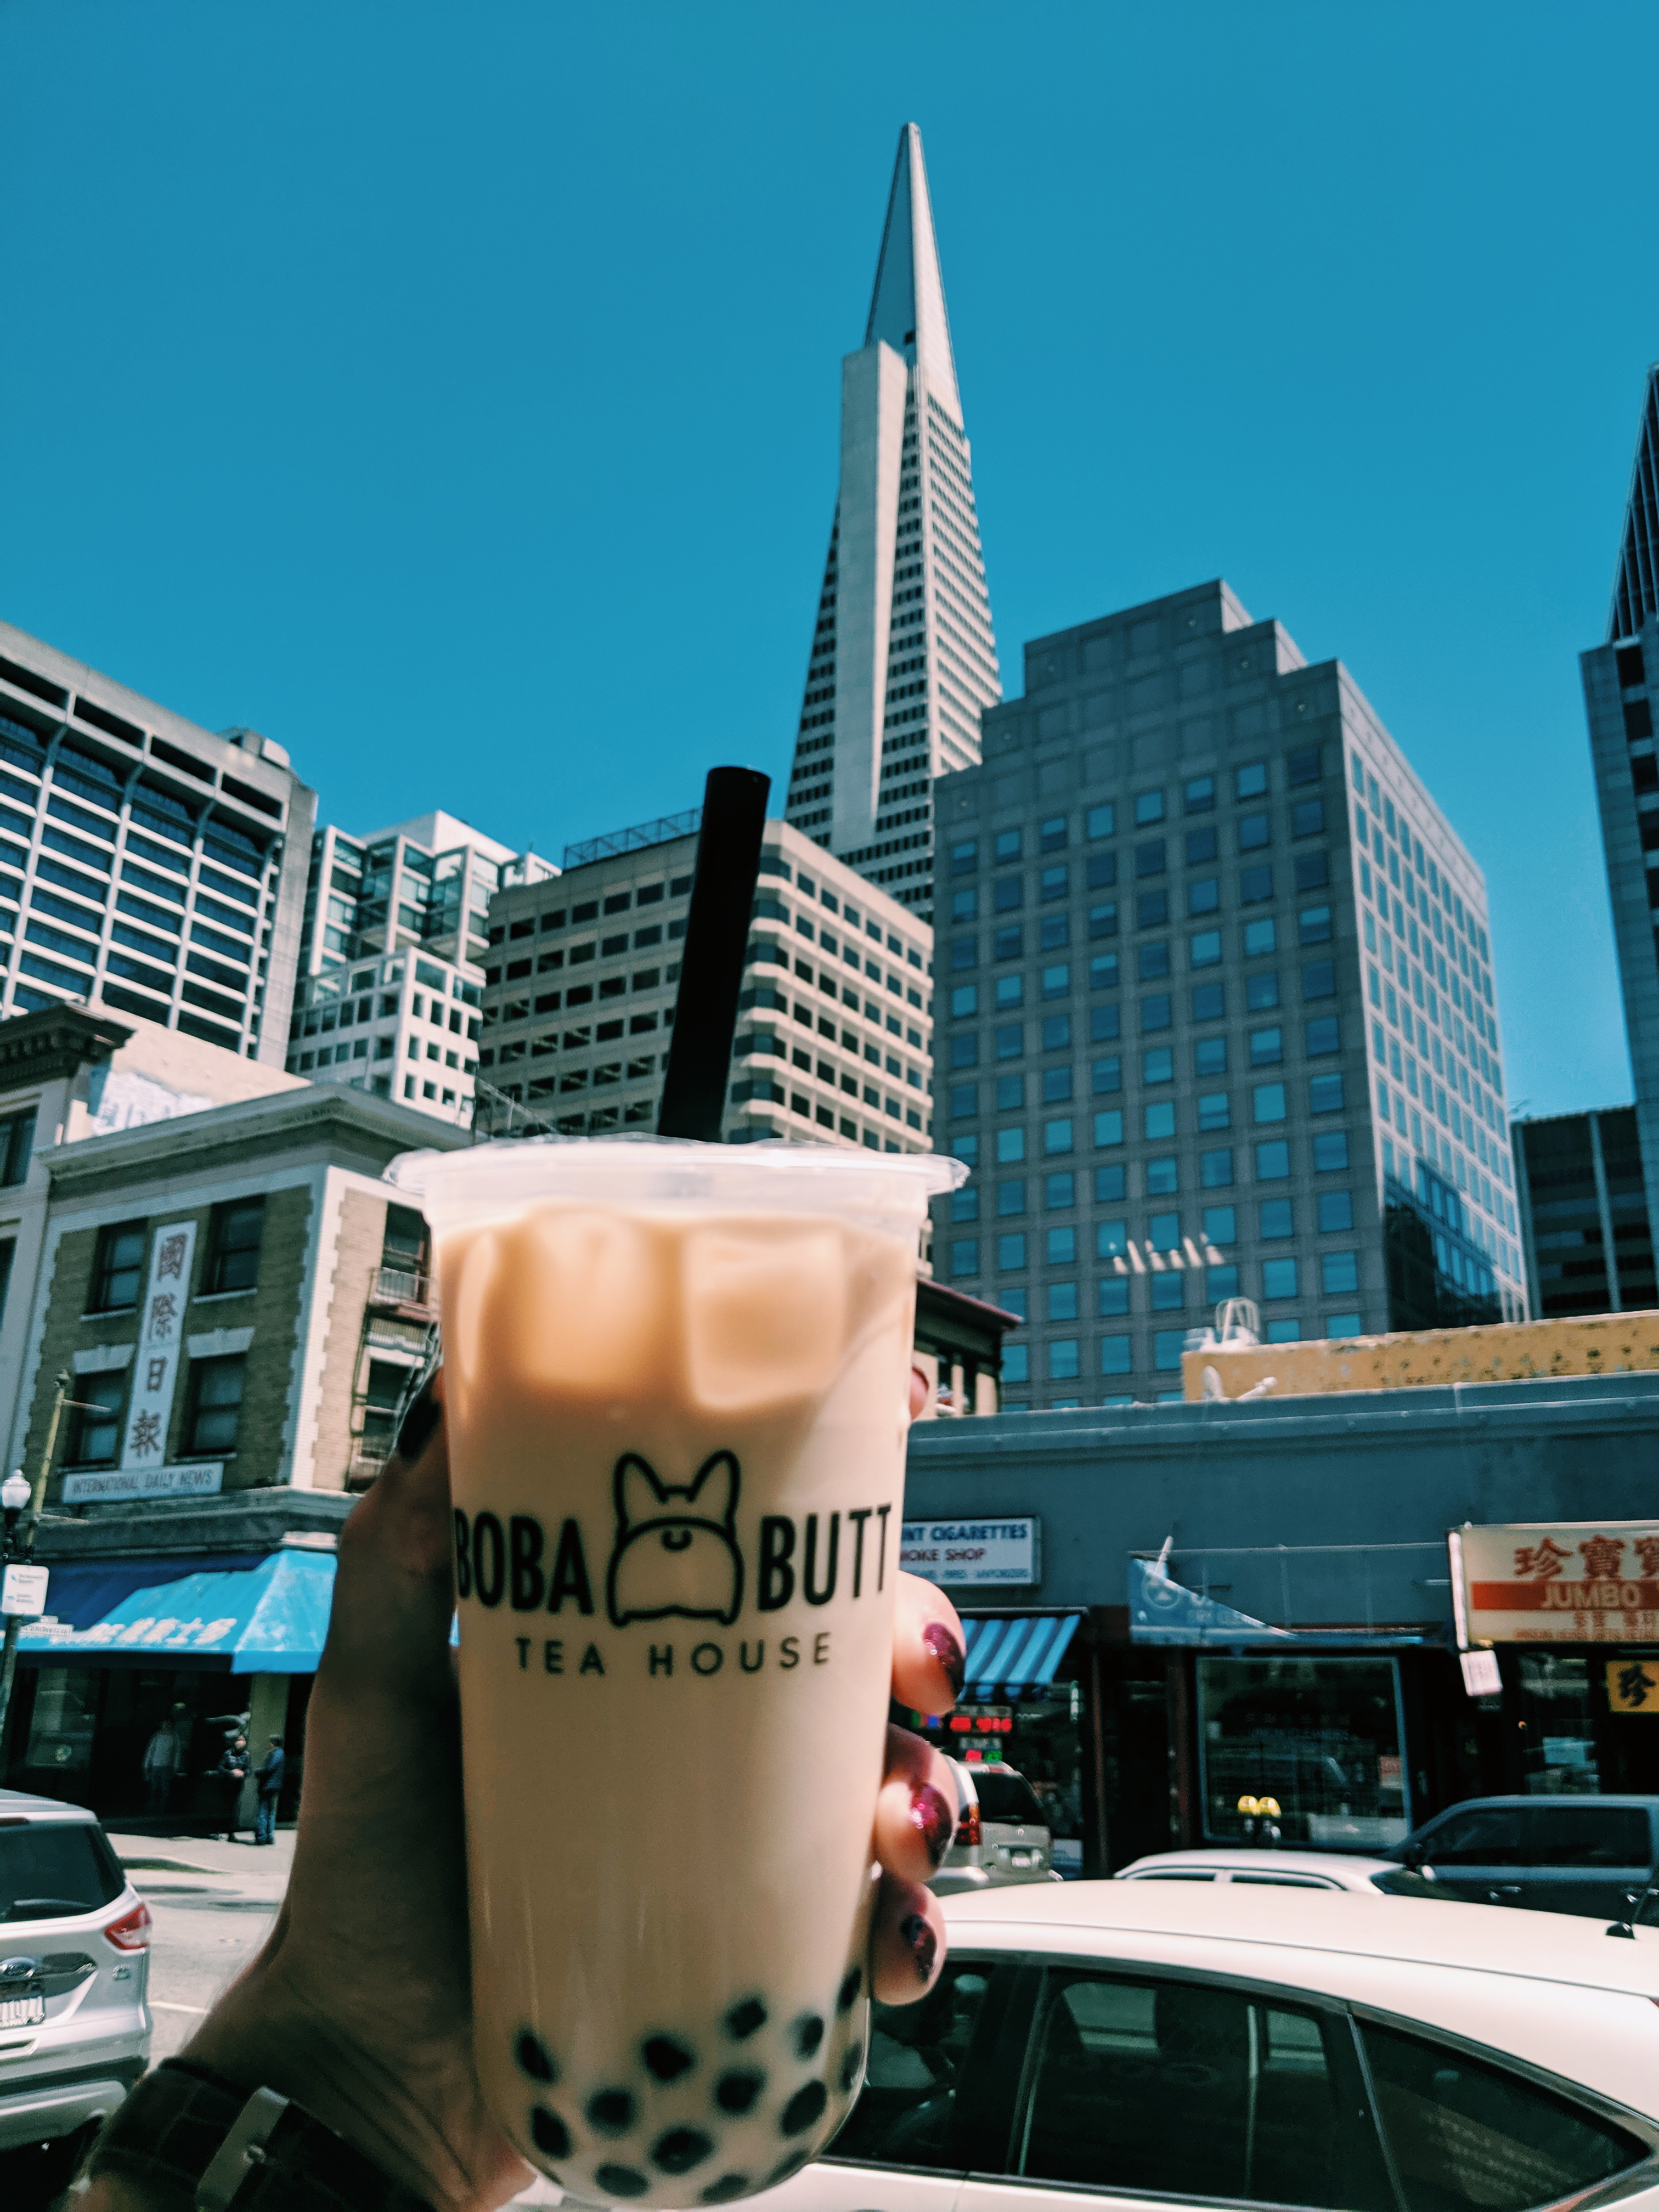 Me holding boba with the iconic Transamerica tower shown in the background.